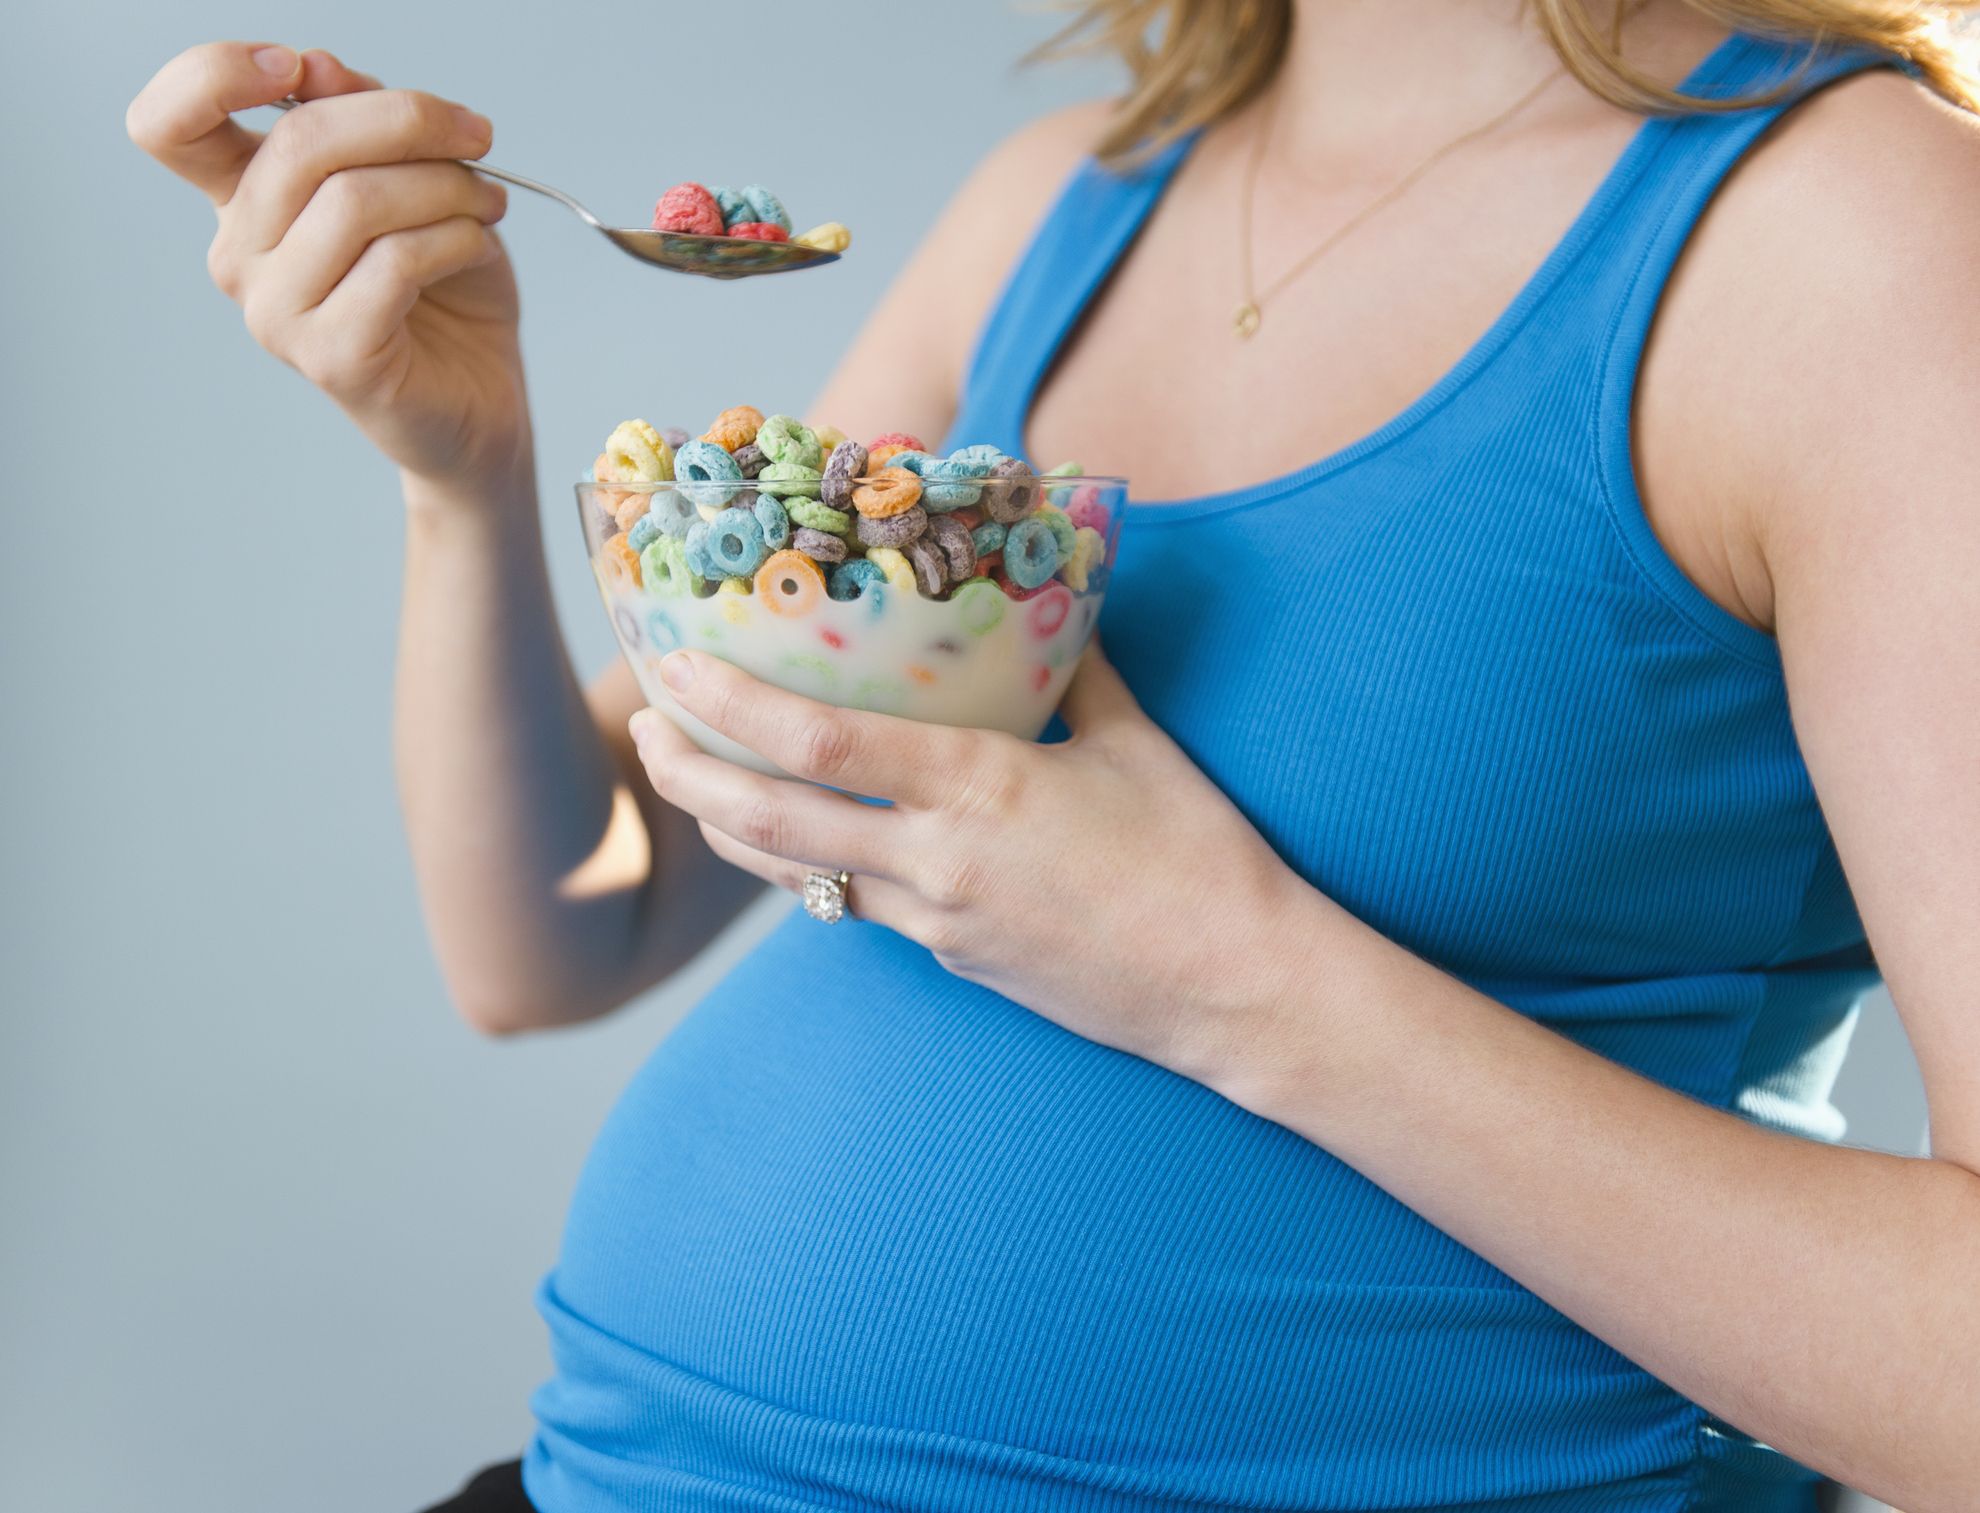 what causes food cravings during pregnancy